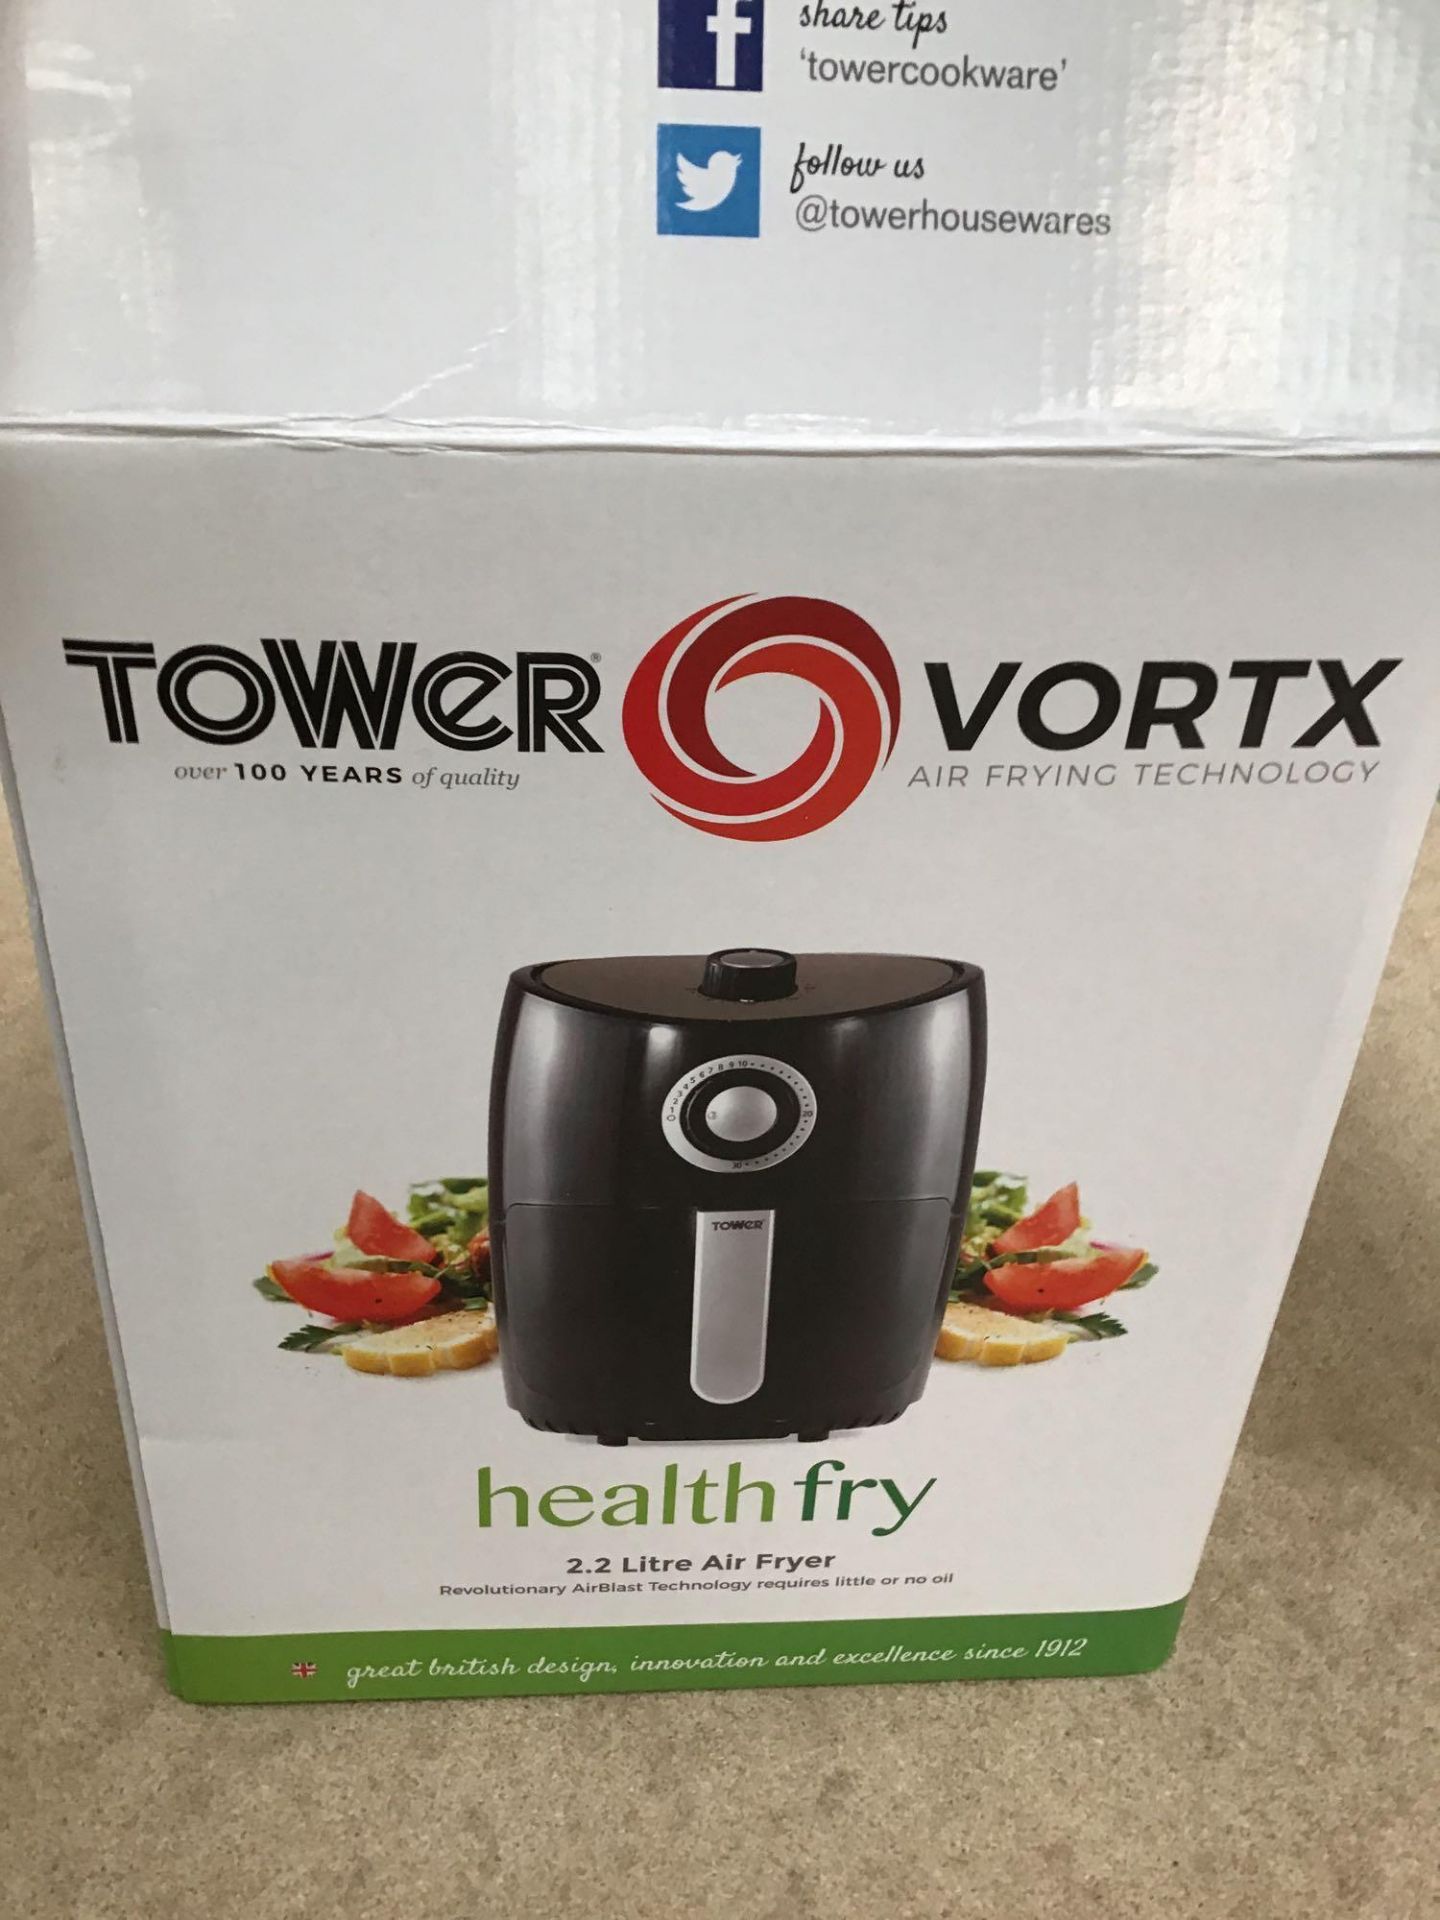 Tower T17023 Compact Air Fryer, £44.99 RRP - Image 2 of 5